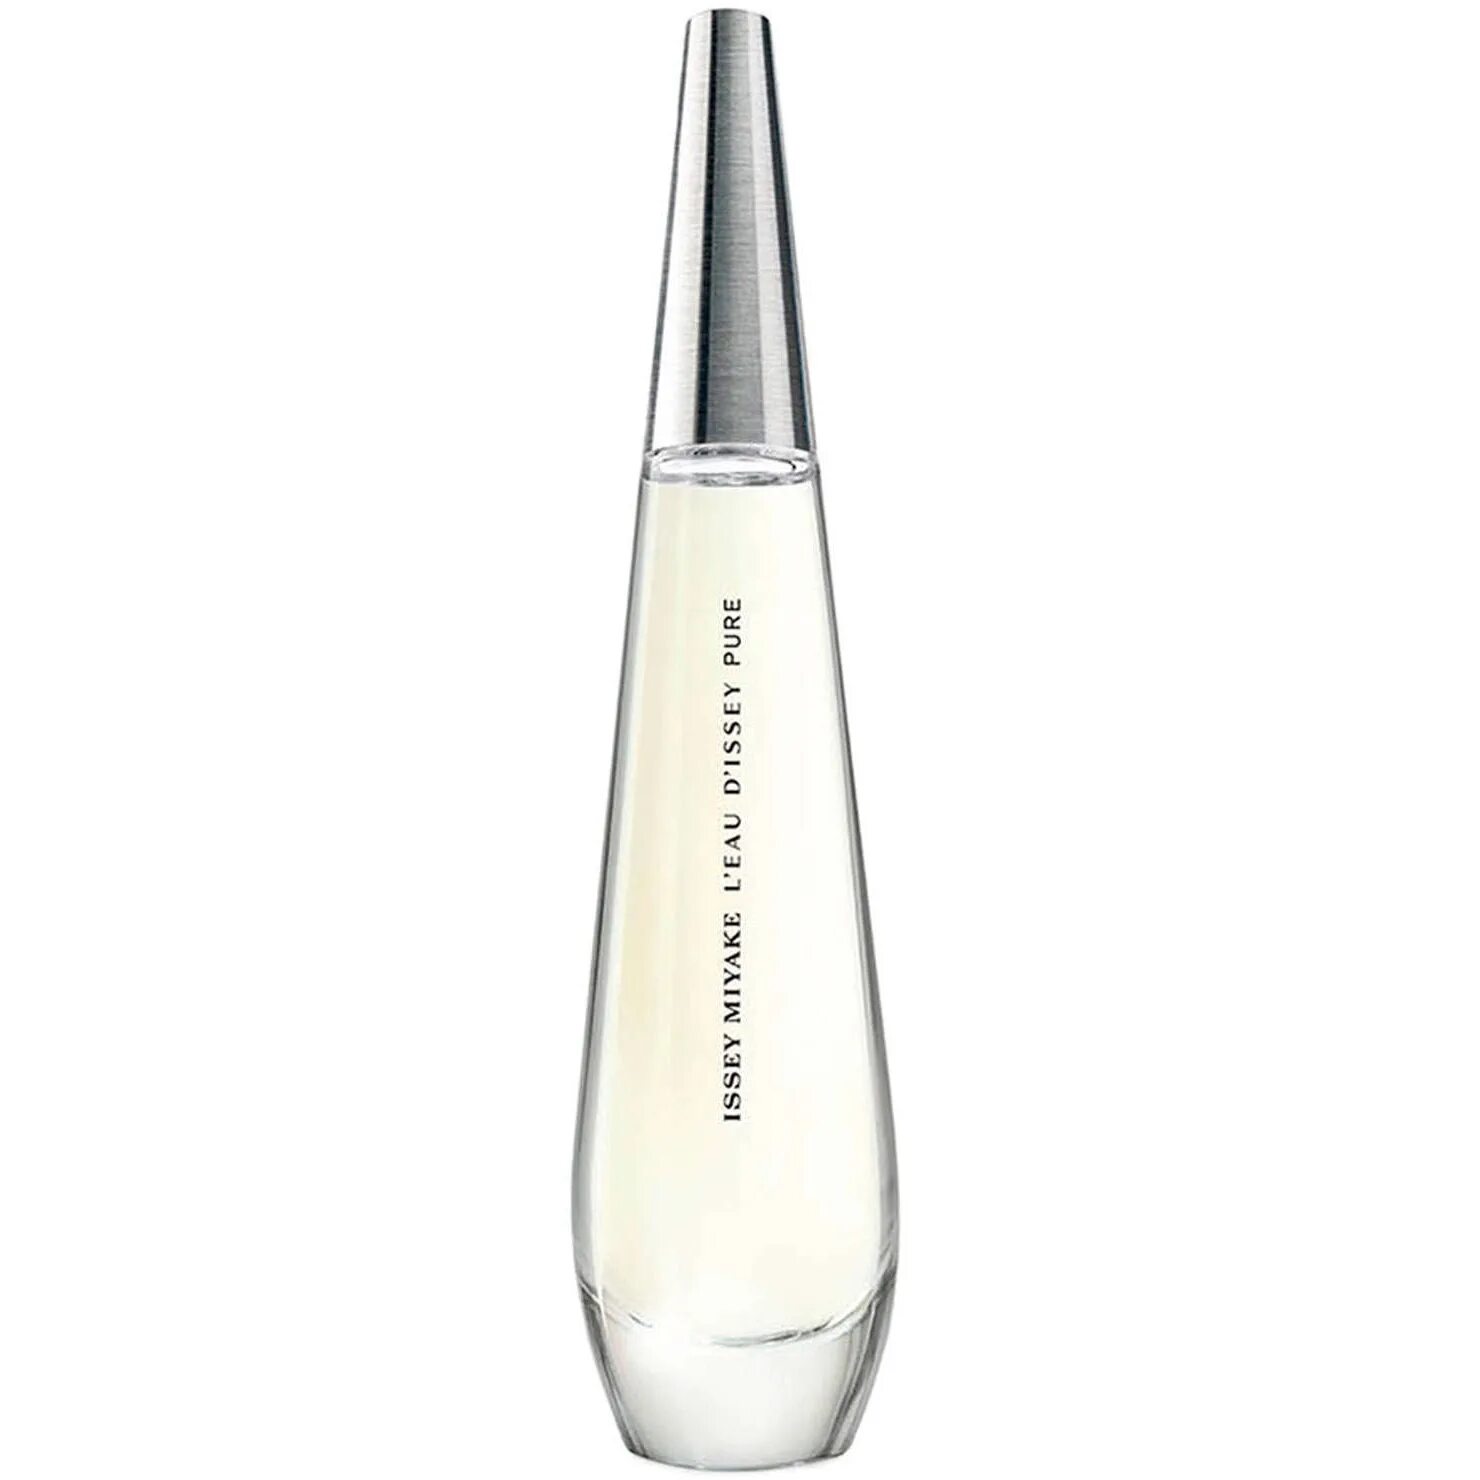 Issey Miyake l'Eau d'Issey Pure 90 мл. Issey Miyake l'Eau d'Issey 100 ml. Issey Miyake l`Eau d`Issey. Issey Miyake l'Eau d'Issey Pure. Issey miyake духи